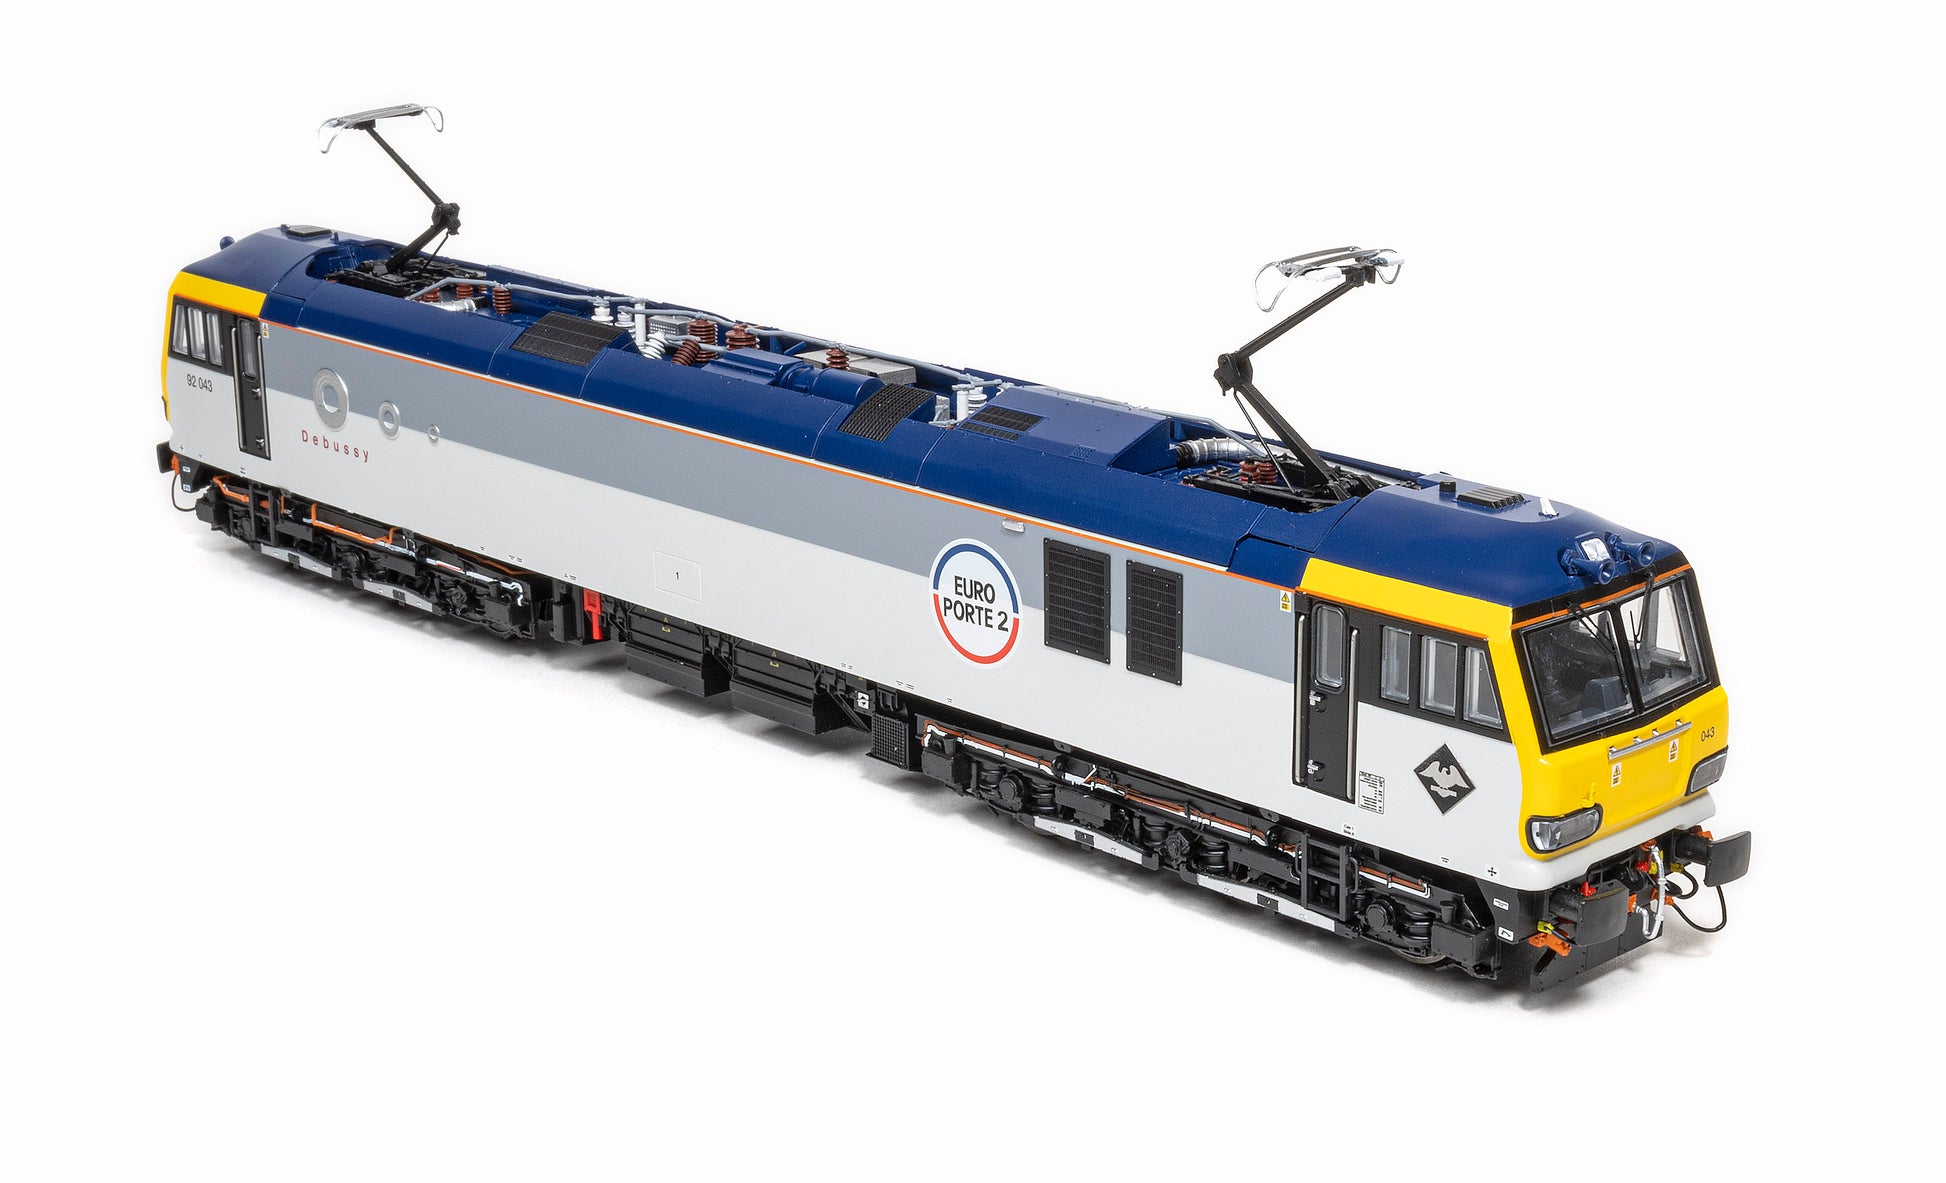 Accurascale ACC2201-92043 – ‘Debussy’ - Railfreight Grey with 'Europorte 2' Logo DC/DCC Ready - Chester Model Centre